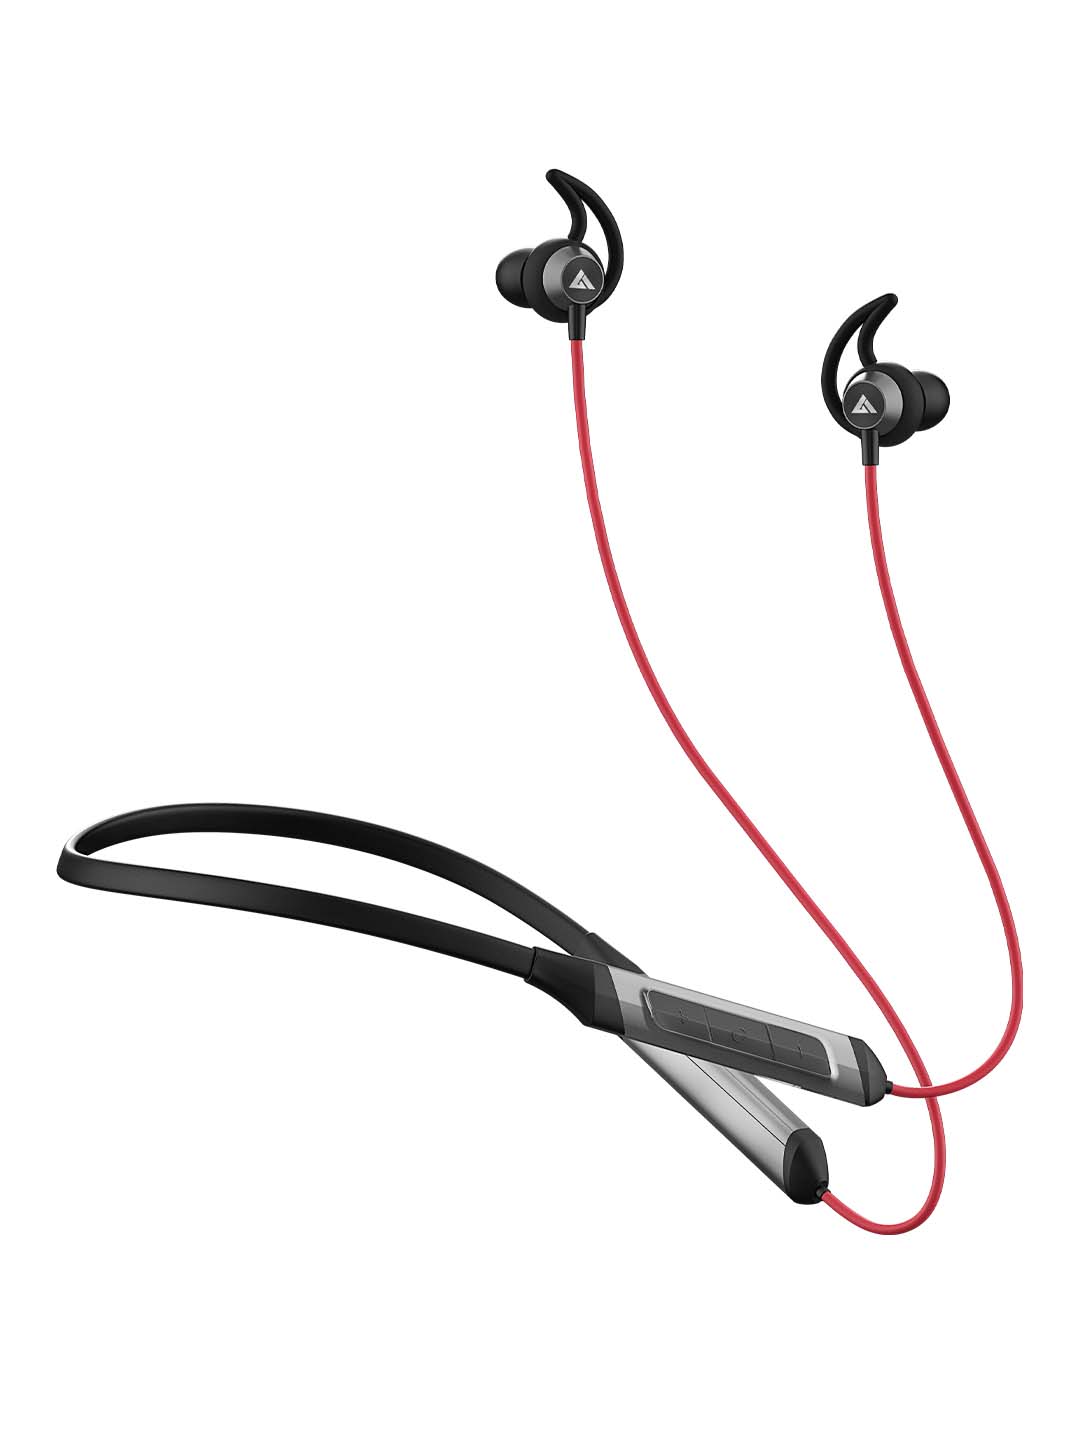 BOULT AUDIO ProBass XCharge In-Ear Wireless Bluetooth Earphones - Red Price in India